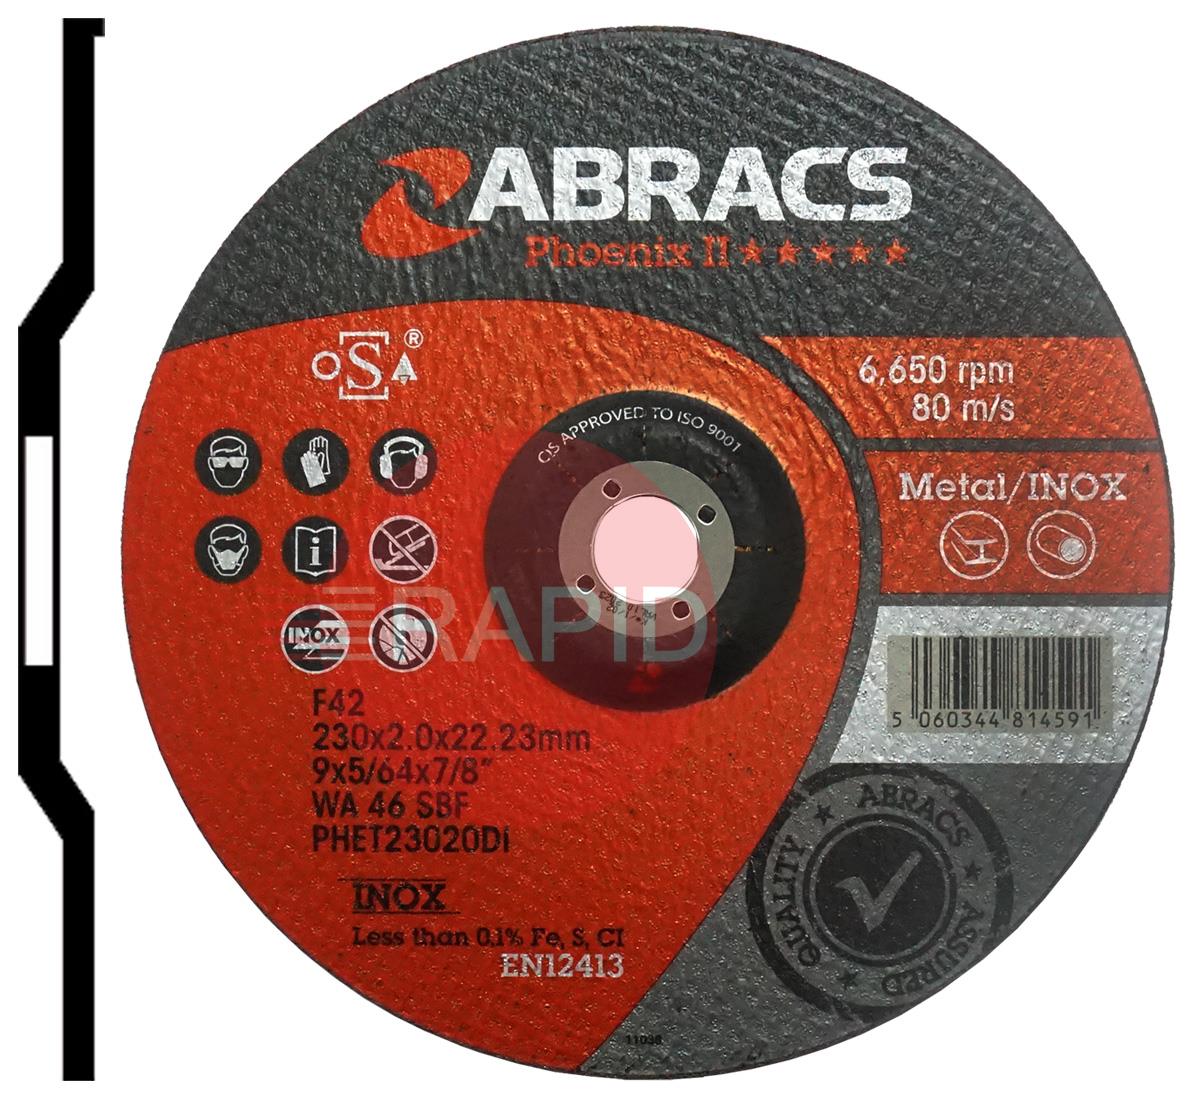 PHET23020DI  Abracs Phoenix II 230mm (9) Depressed Centre Cutting Disc 2mm Thick. Grade 20A46R Inox-BF For Steel & Stainless Steel.